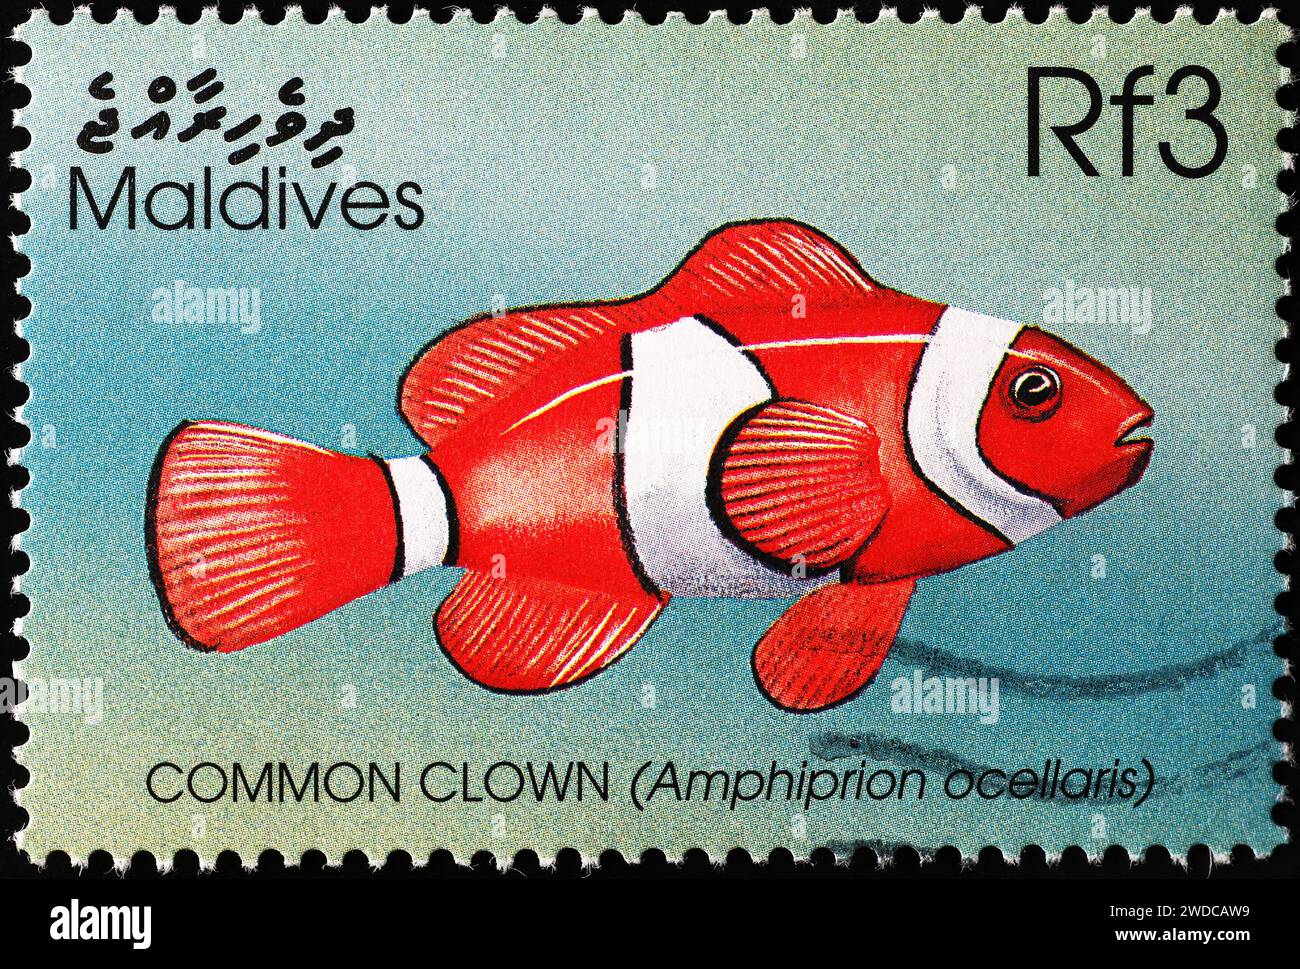 Common clownfish on postage stamp from Maldives Stock Photo